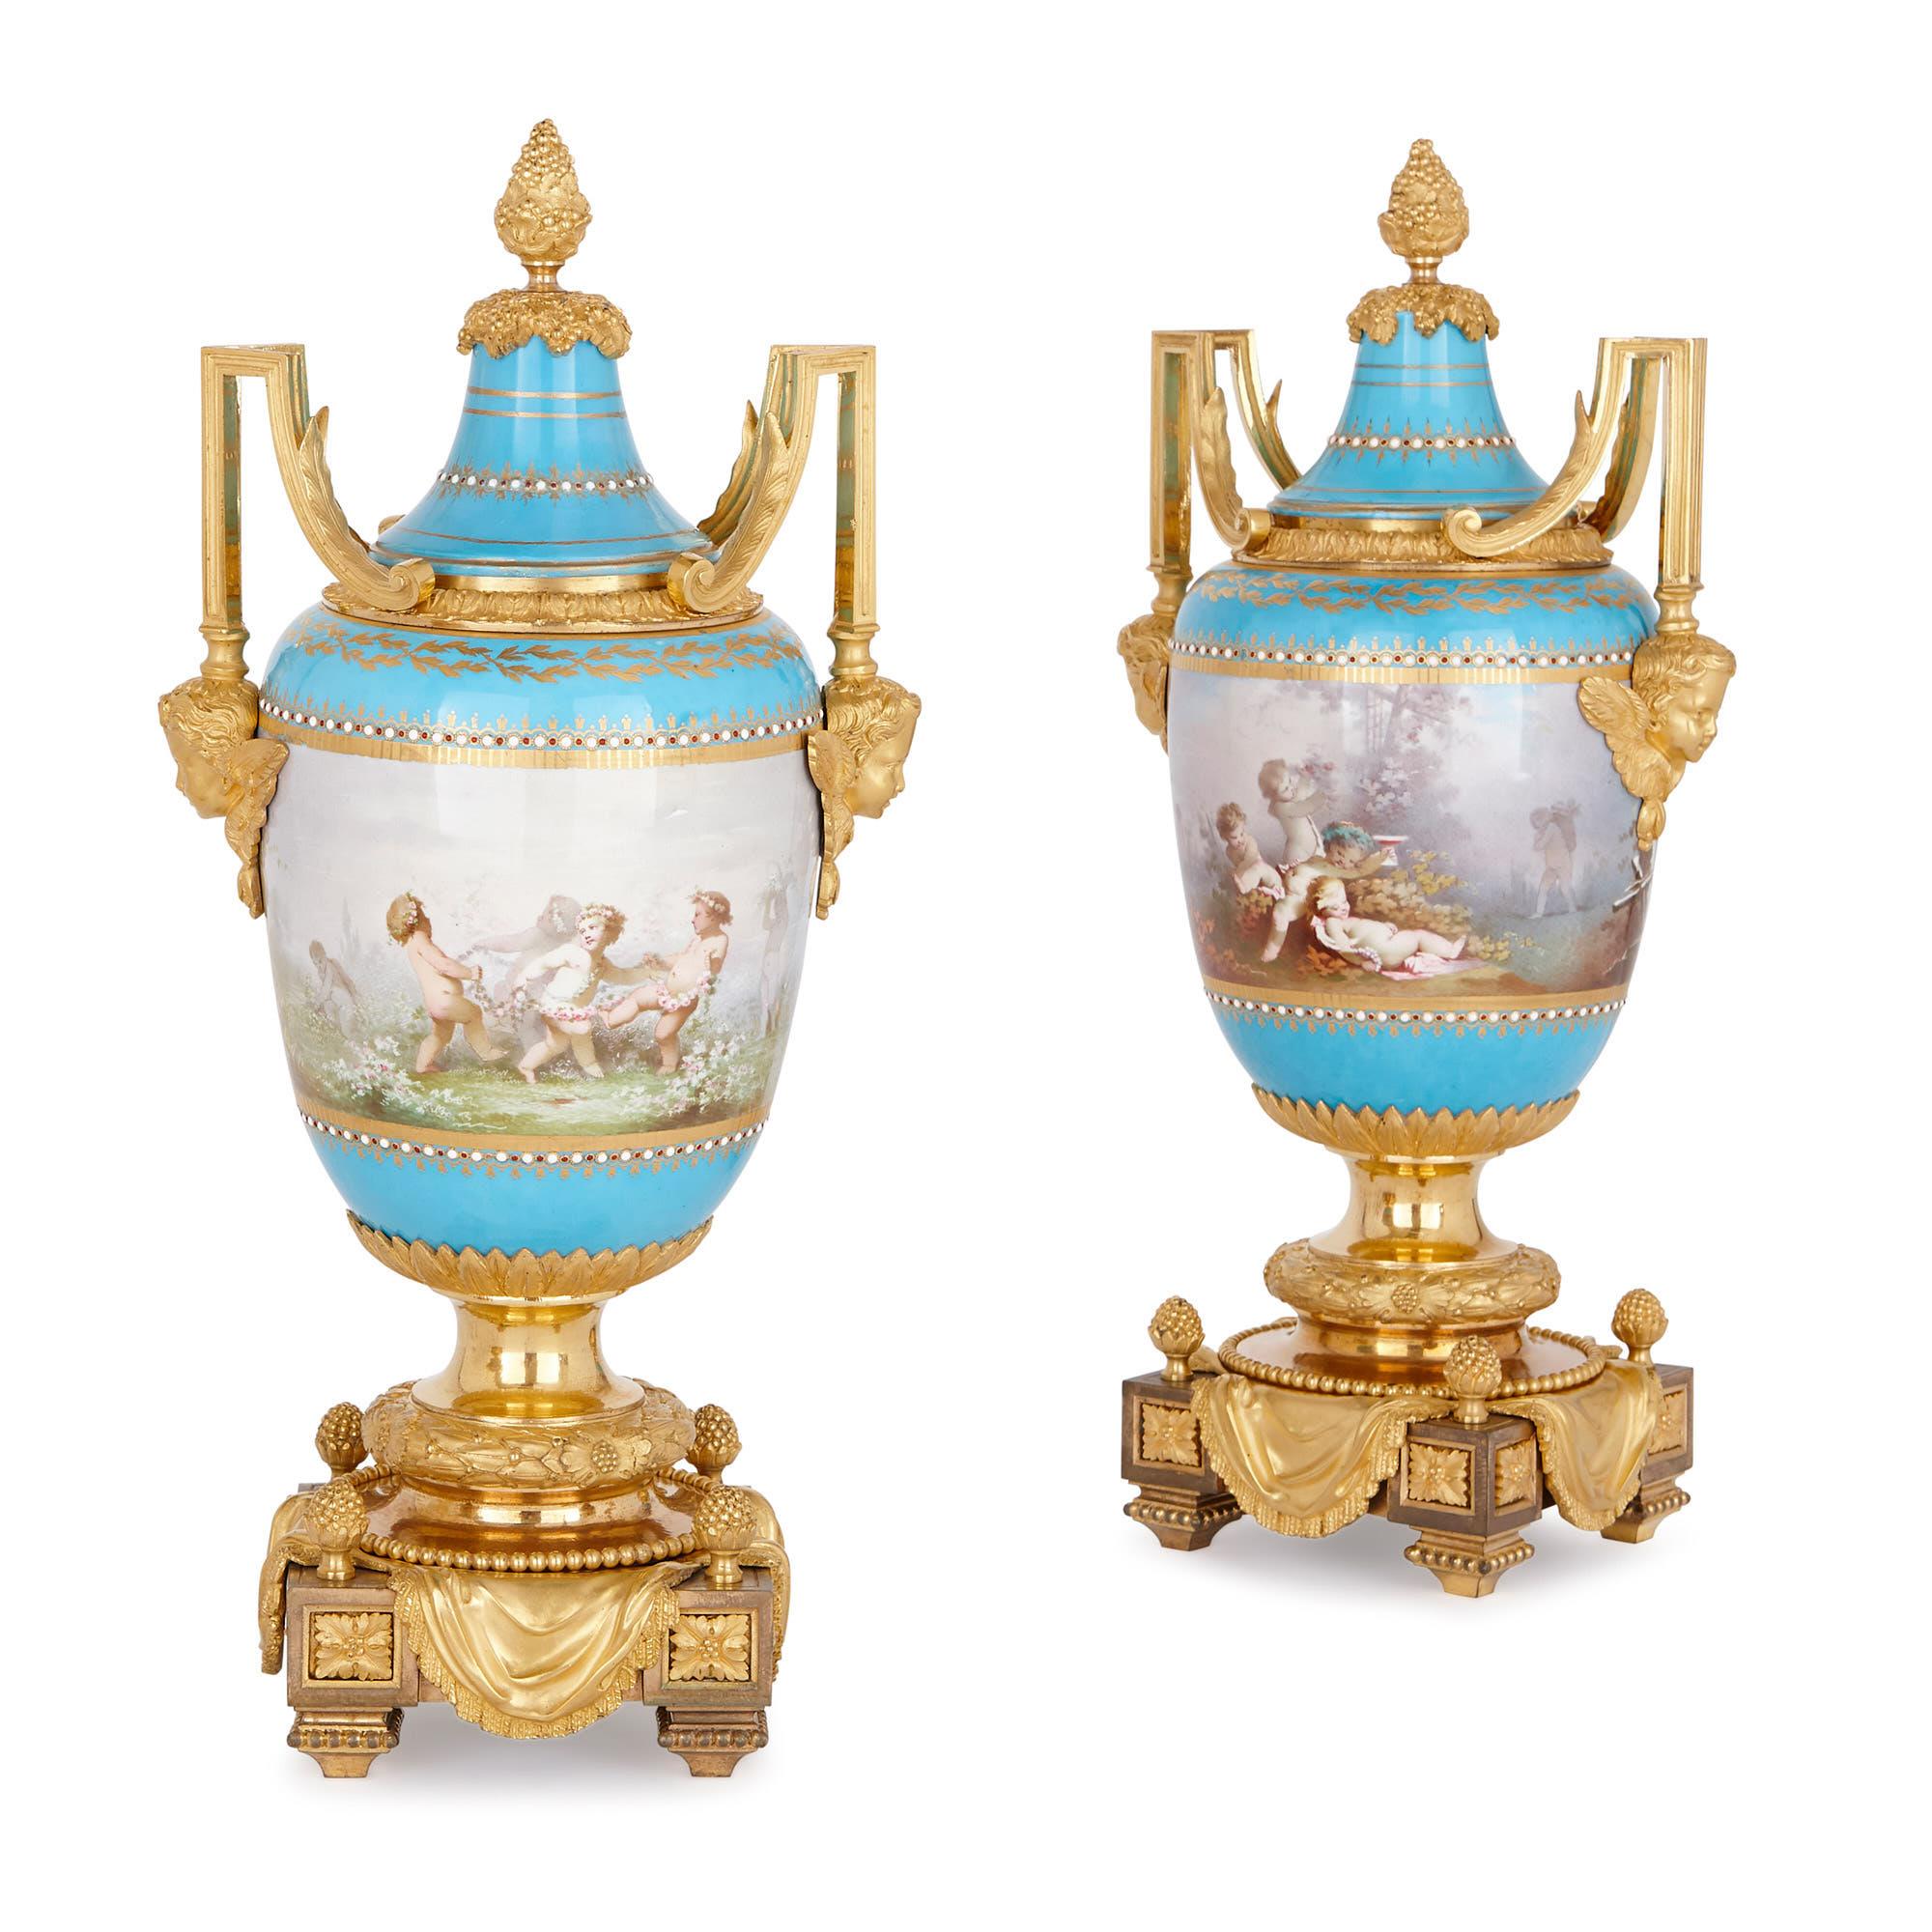 Sèvres Porcelain Garniture, Mounted in Gilt Bronze by Picard In Good Condition For Sale In London, GB